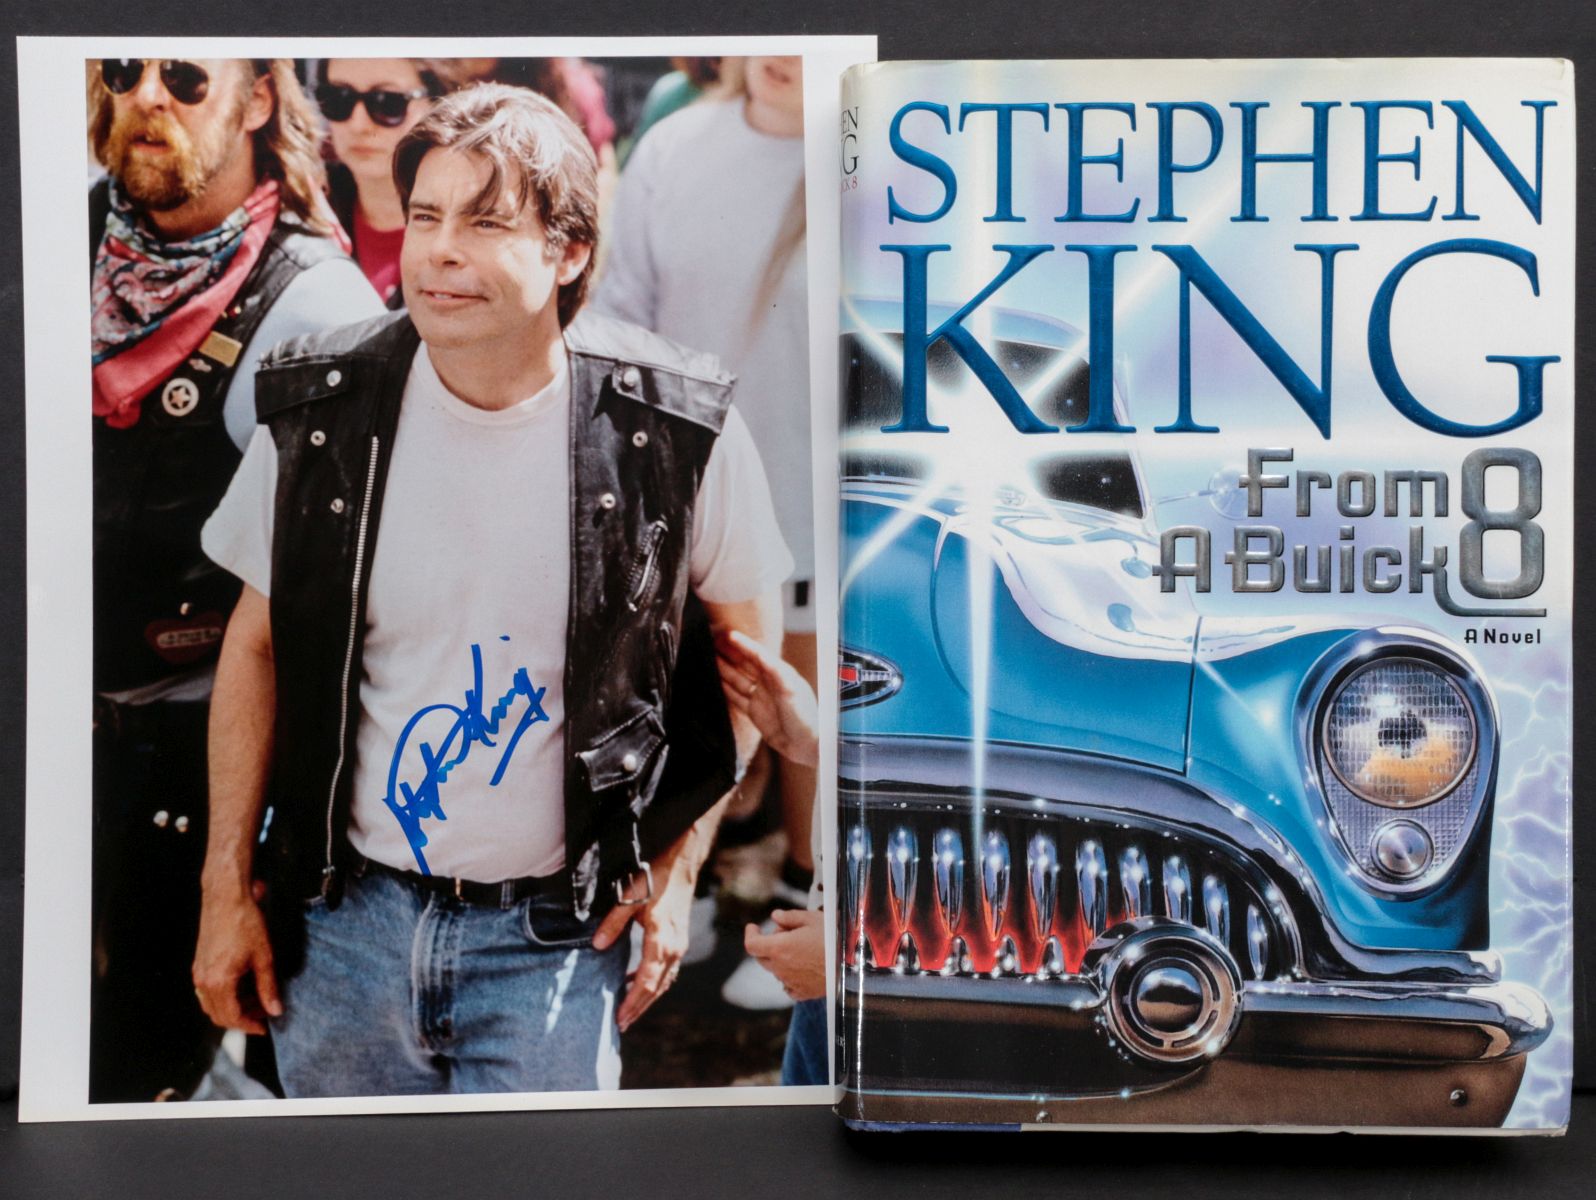 STEPHEN KING AUTOGRAPHED BOOK AND PHOTOGRAPH